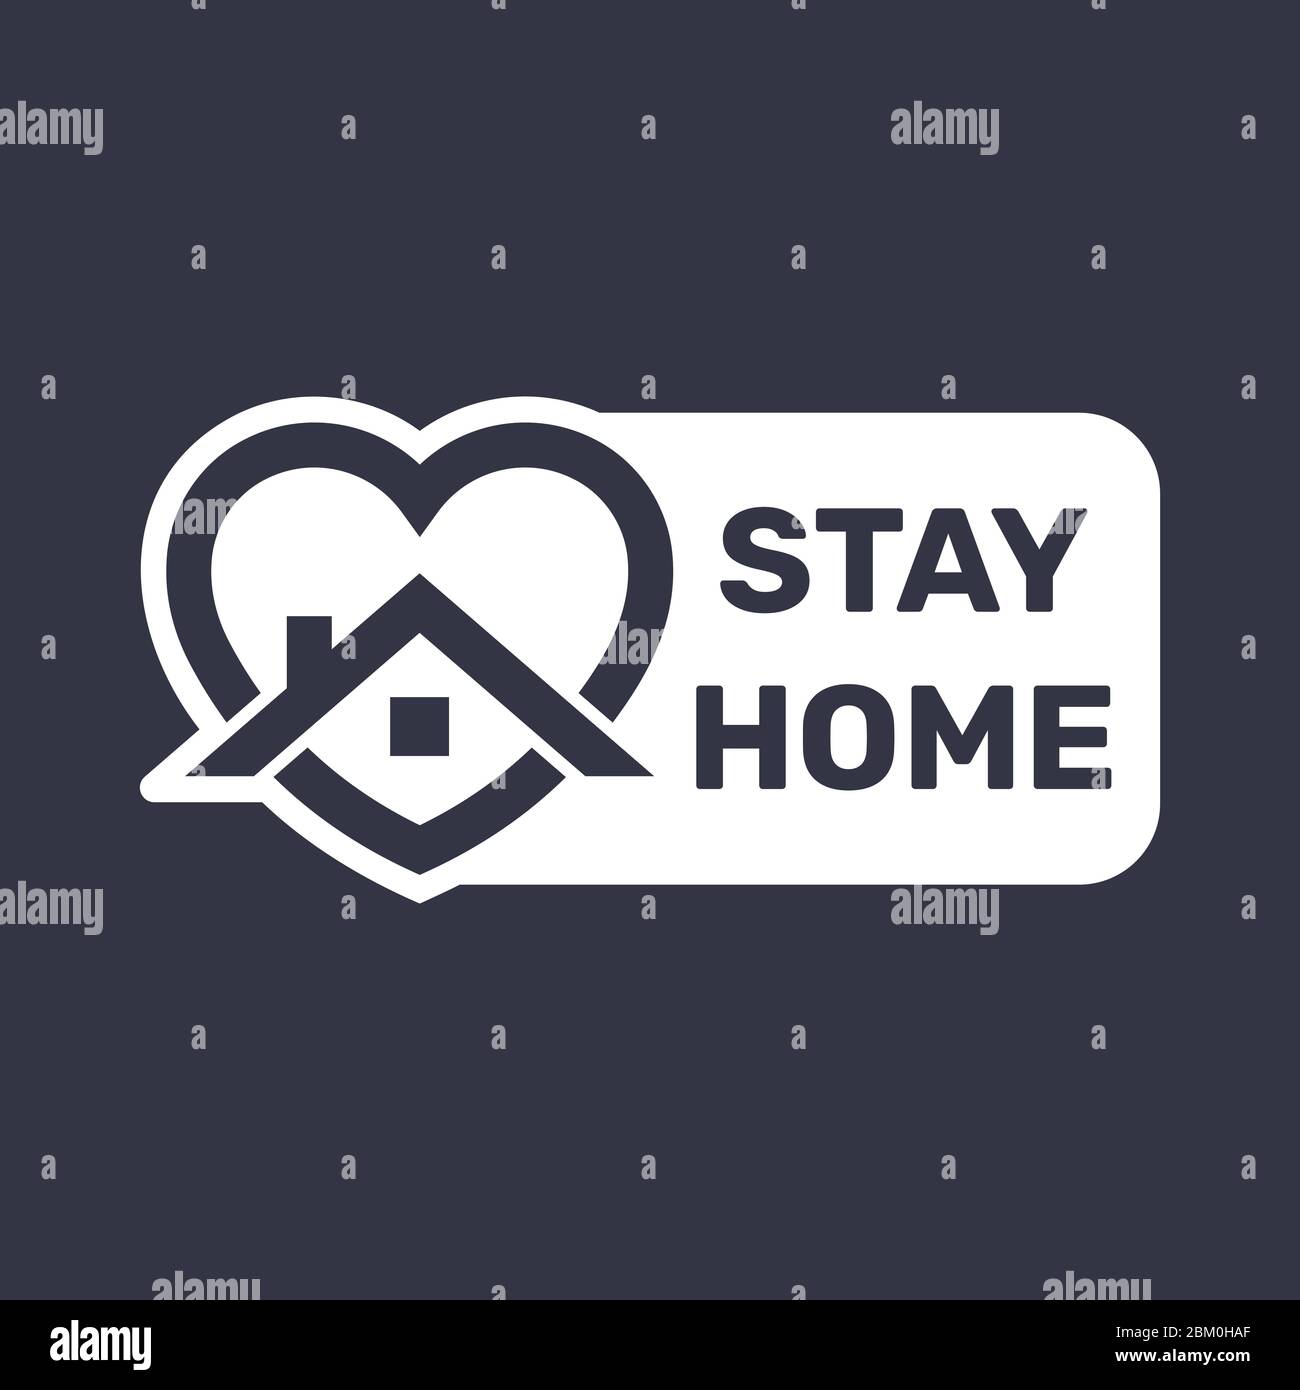 Stay at home. COVID 19 or coronavirus protection campaign logo. Self isolation appeal as sign or symbol. Virus prevention concept. Vector illustration Stock Vector